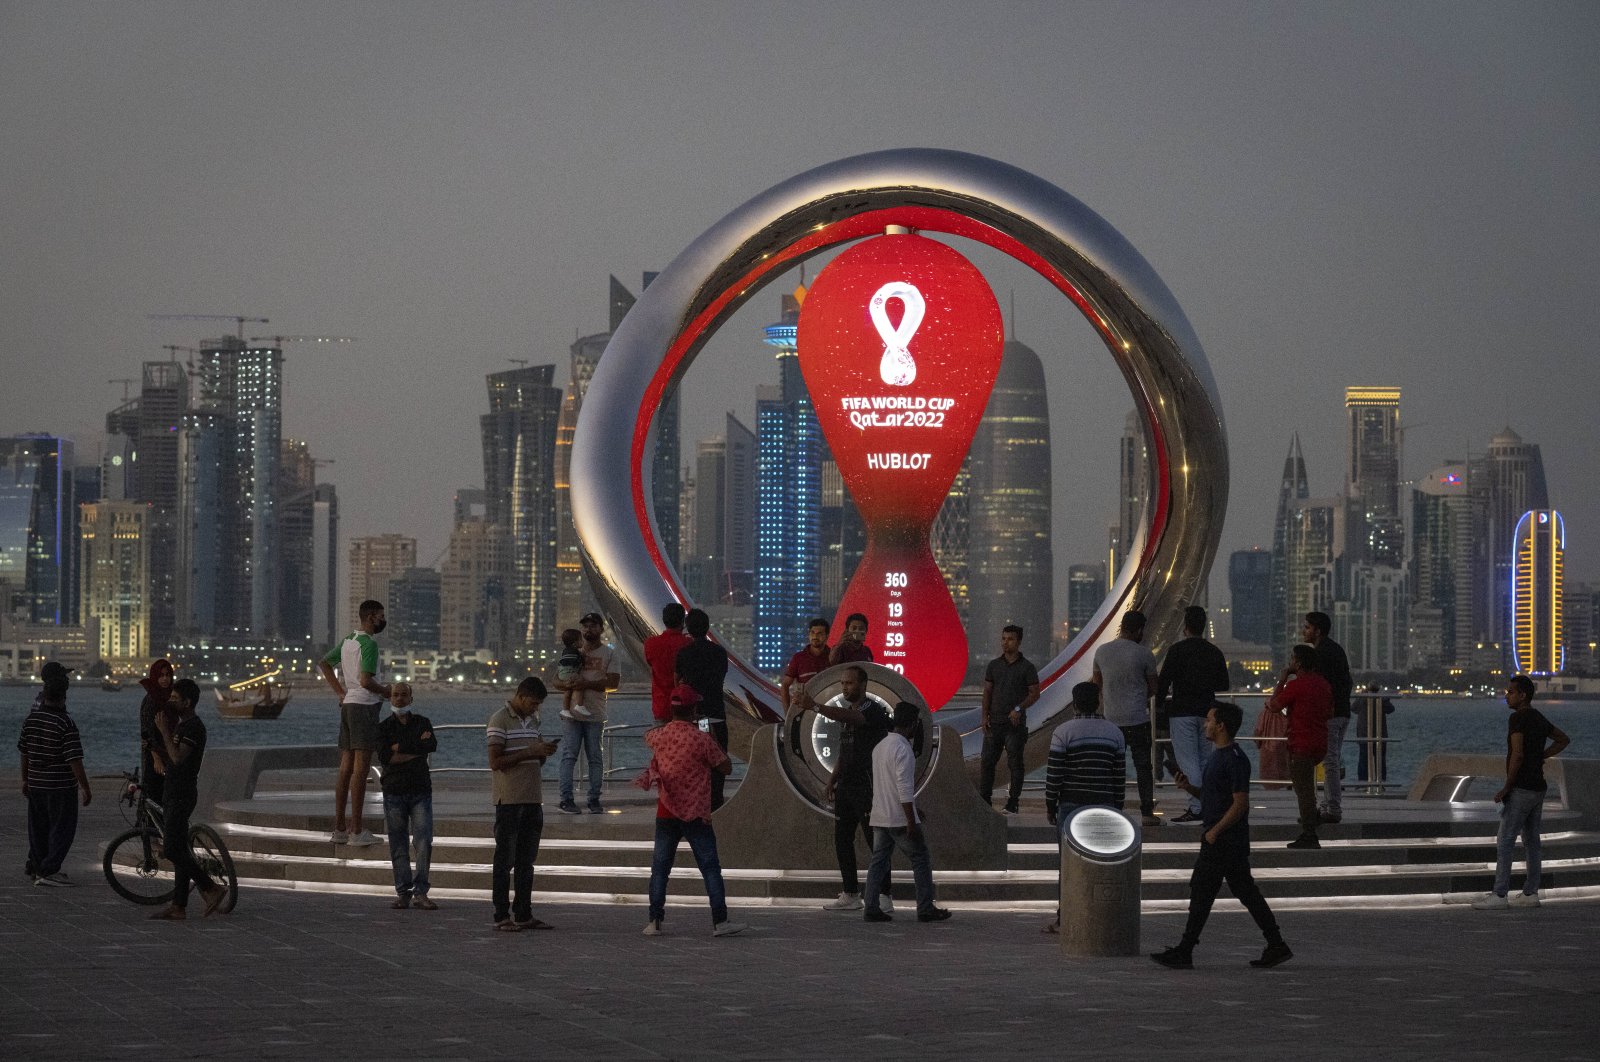 People gather around the official countdown clock showing for the FIFA 2022 World Cup, Doha, Qatar, Nov. 25, 2021. (AP Photo)